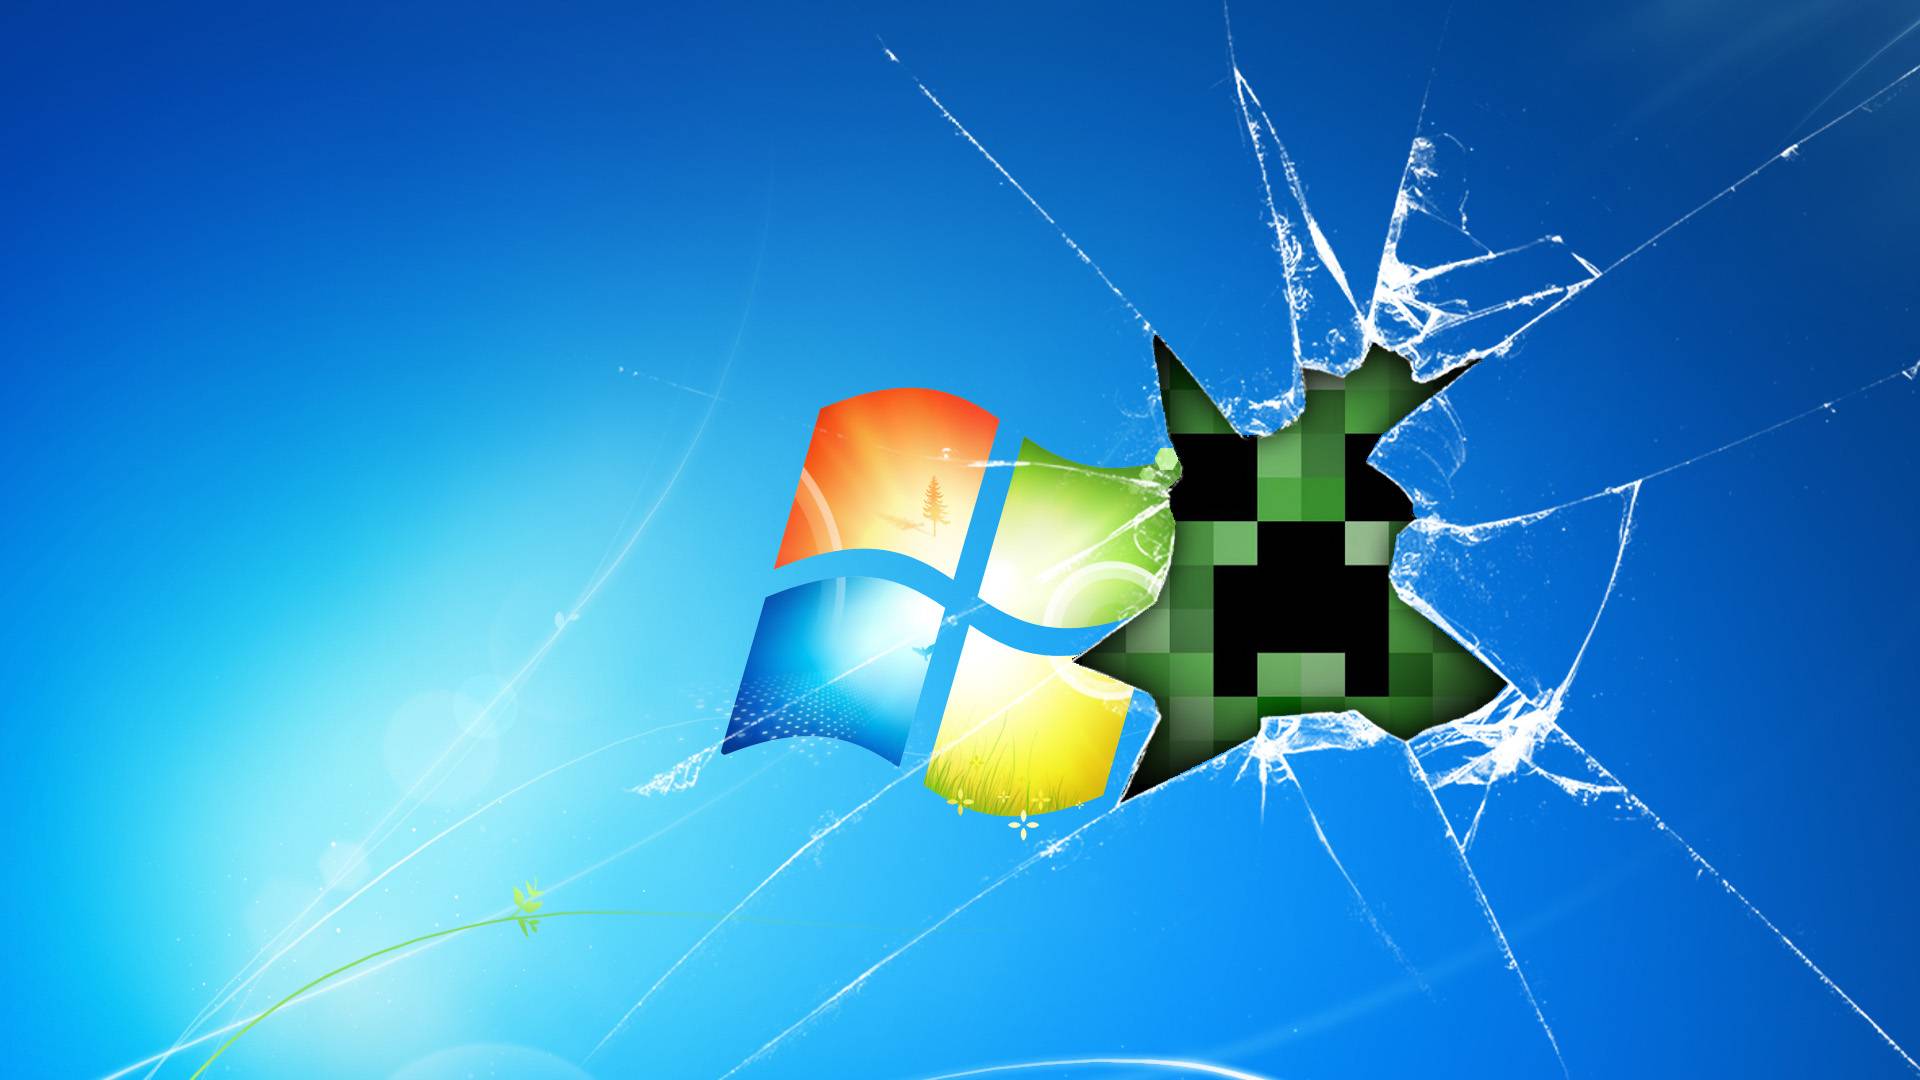 Creeper Wallpaper Of A Breaking Out Your Desktop